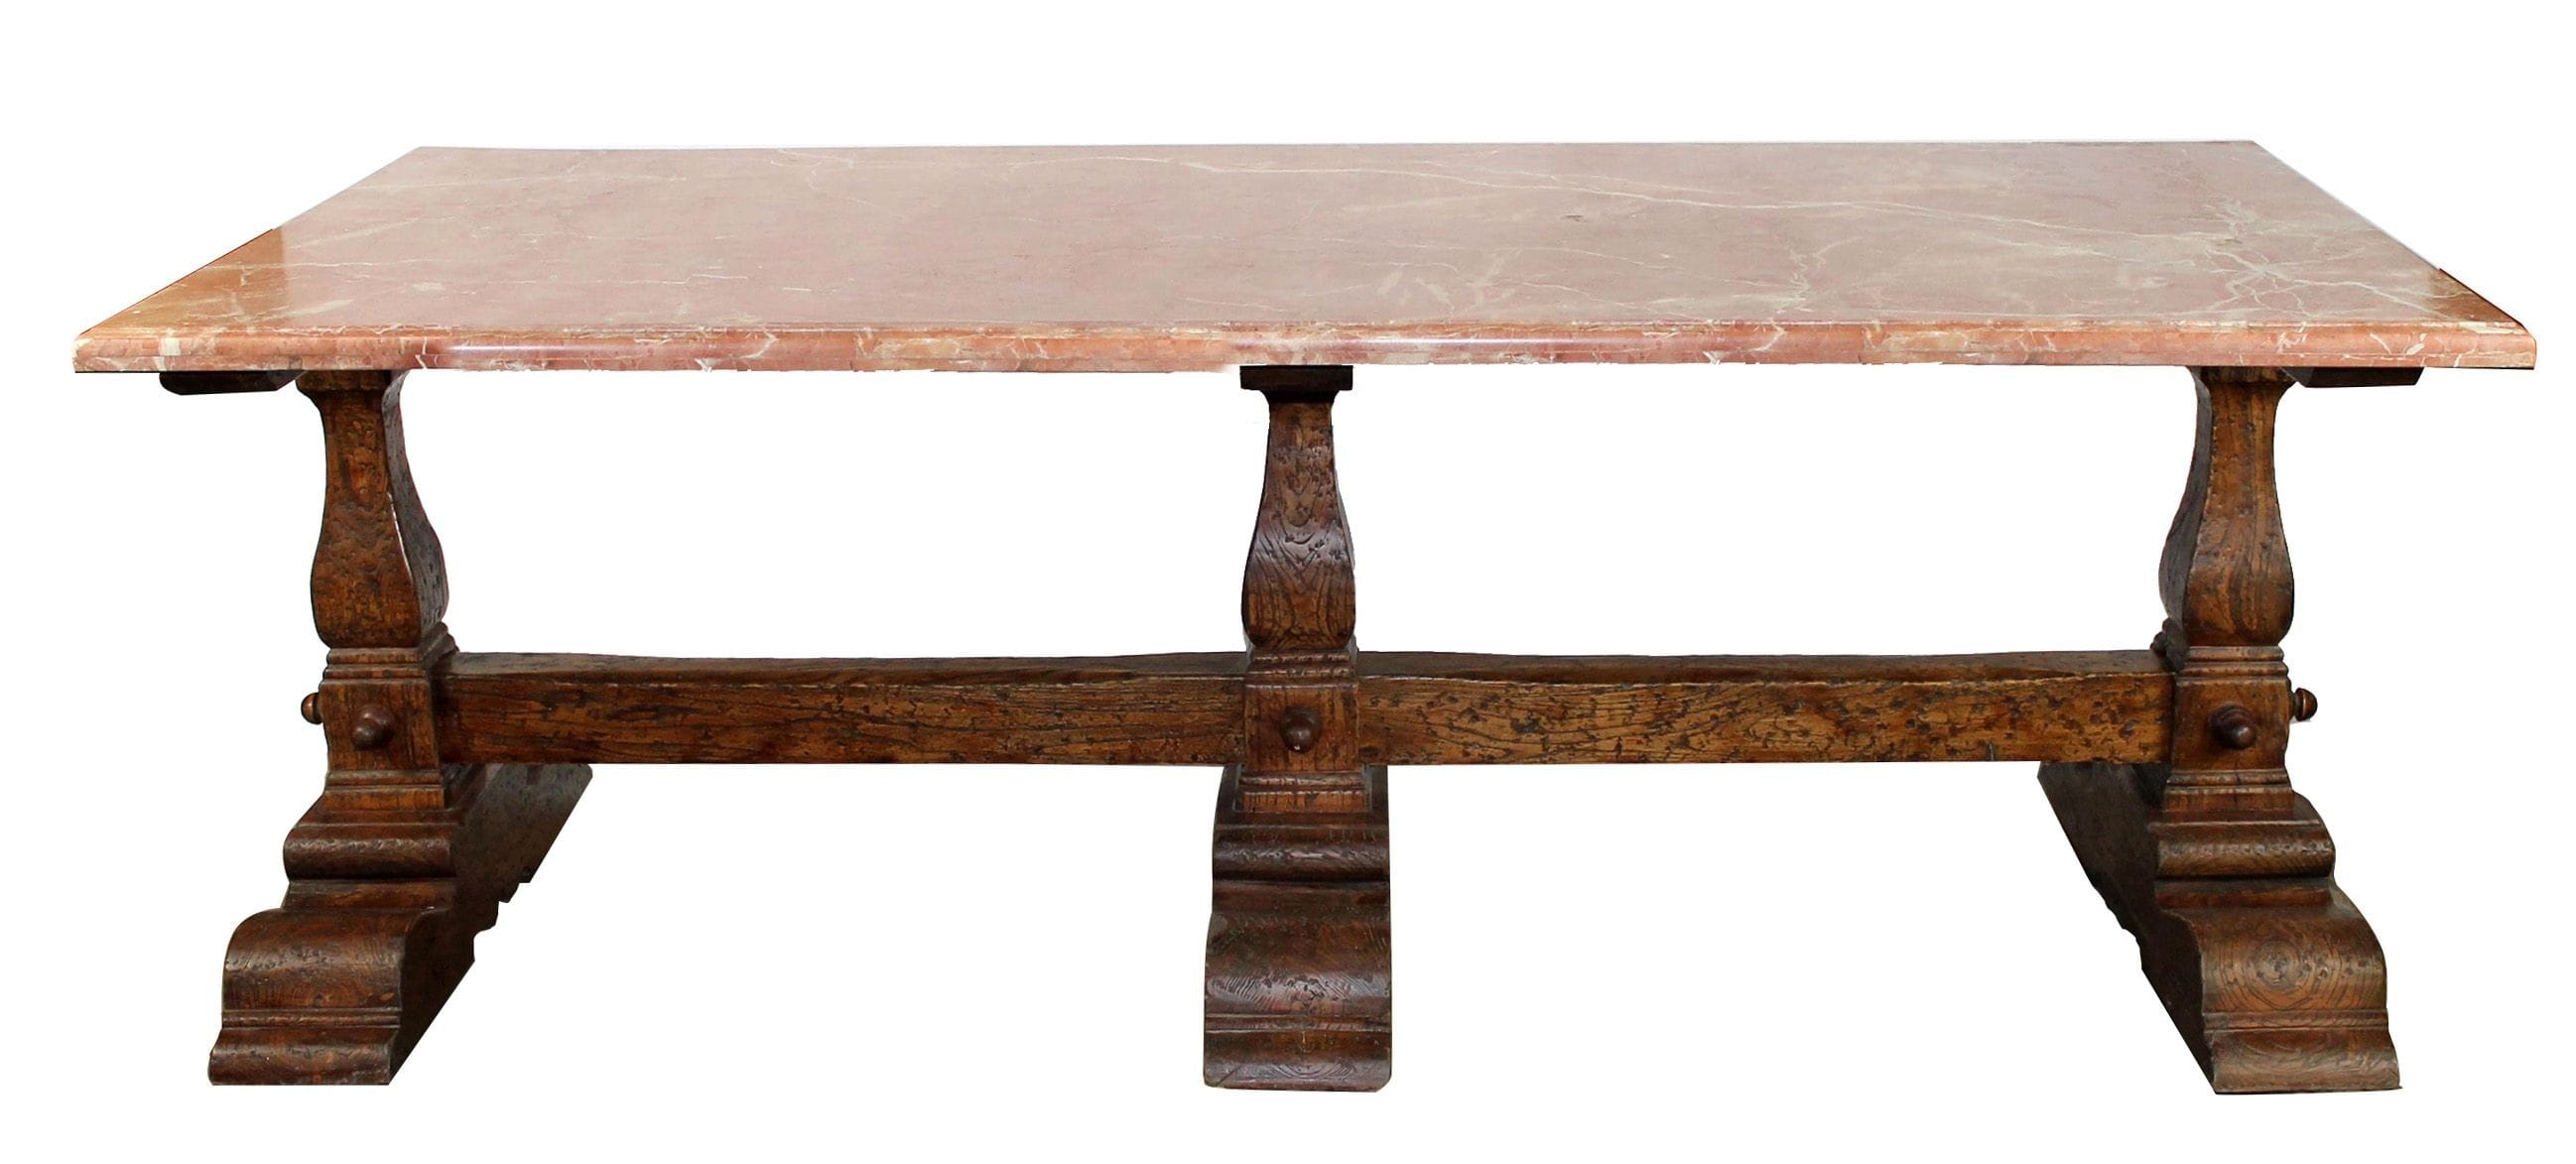 Swedish triple pedestal table in elm with marble top